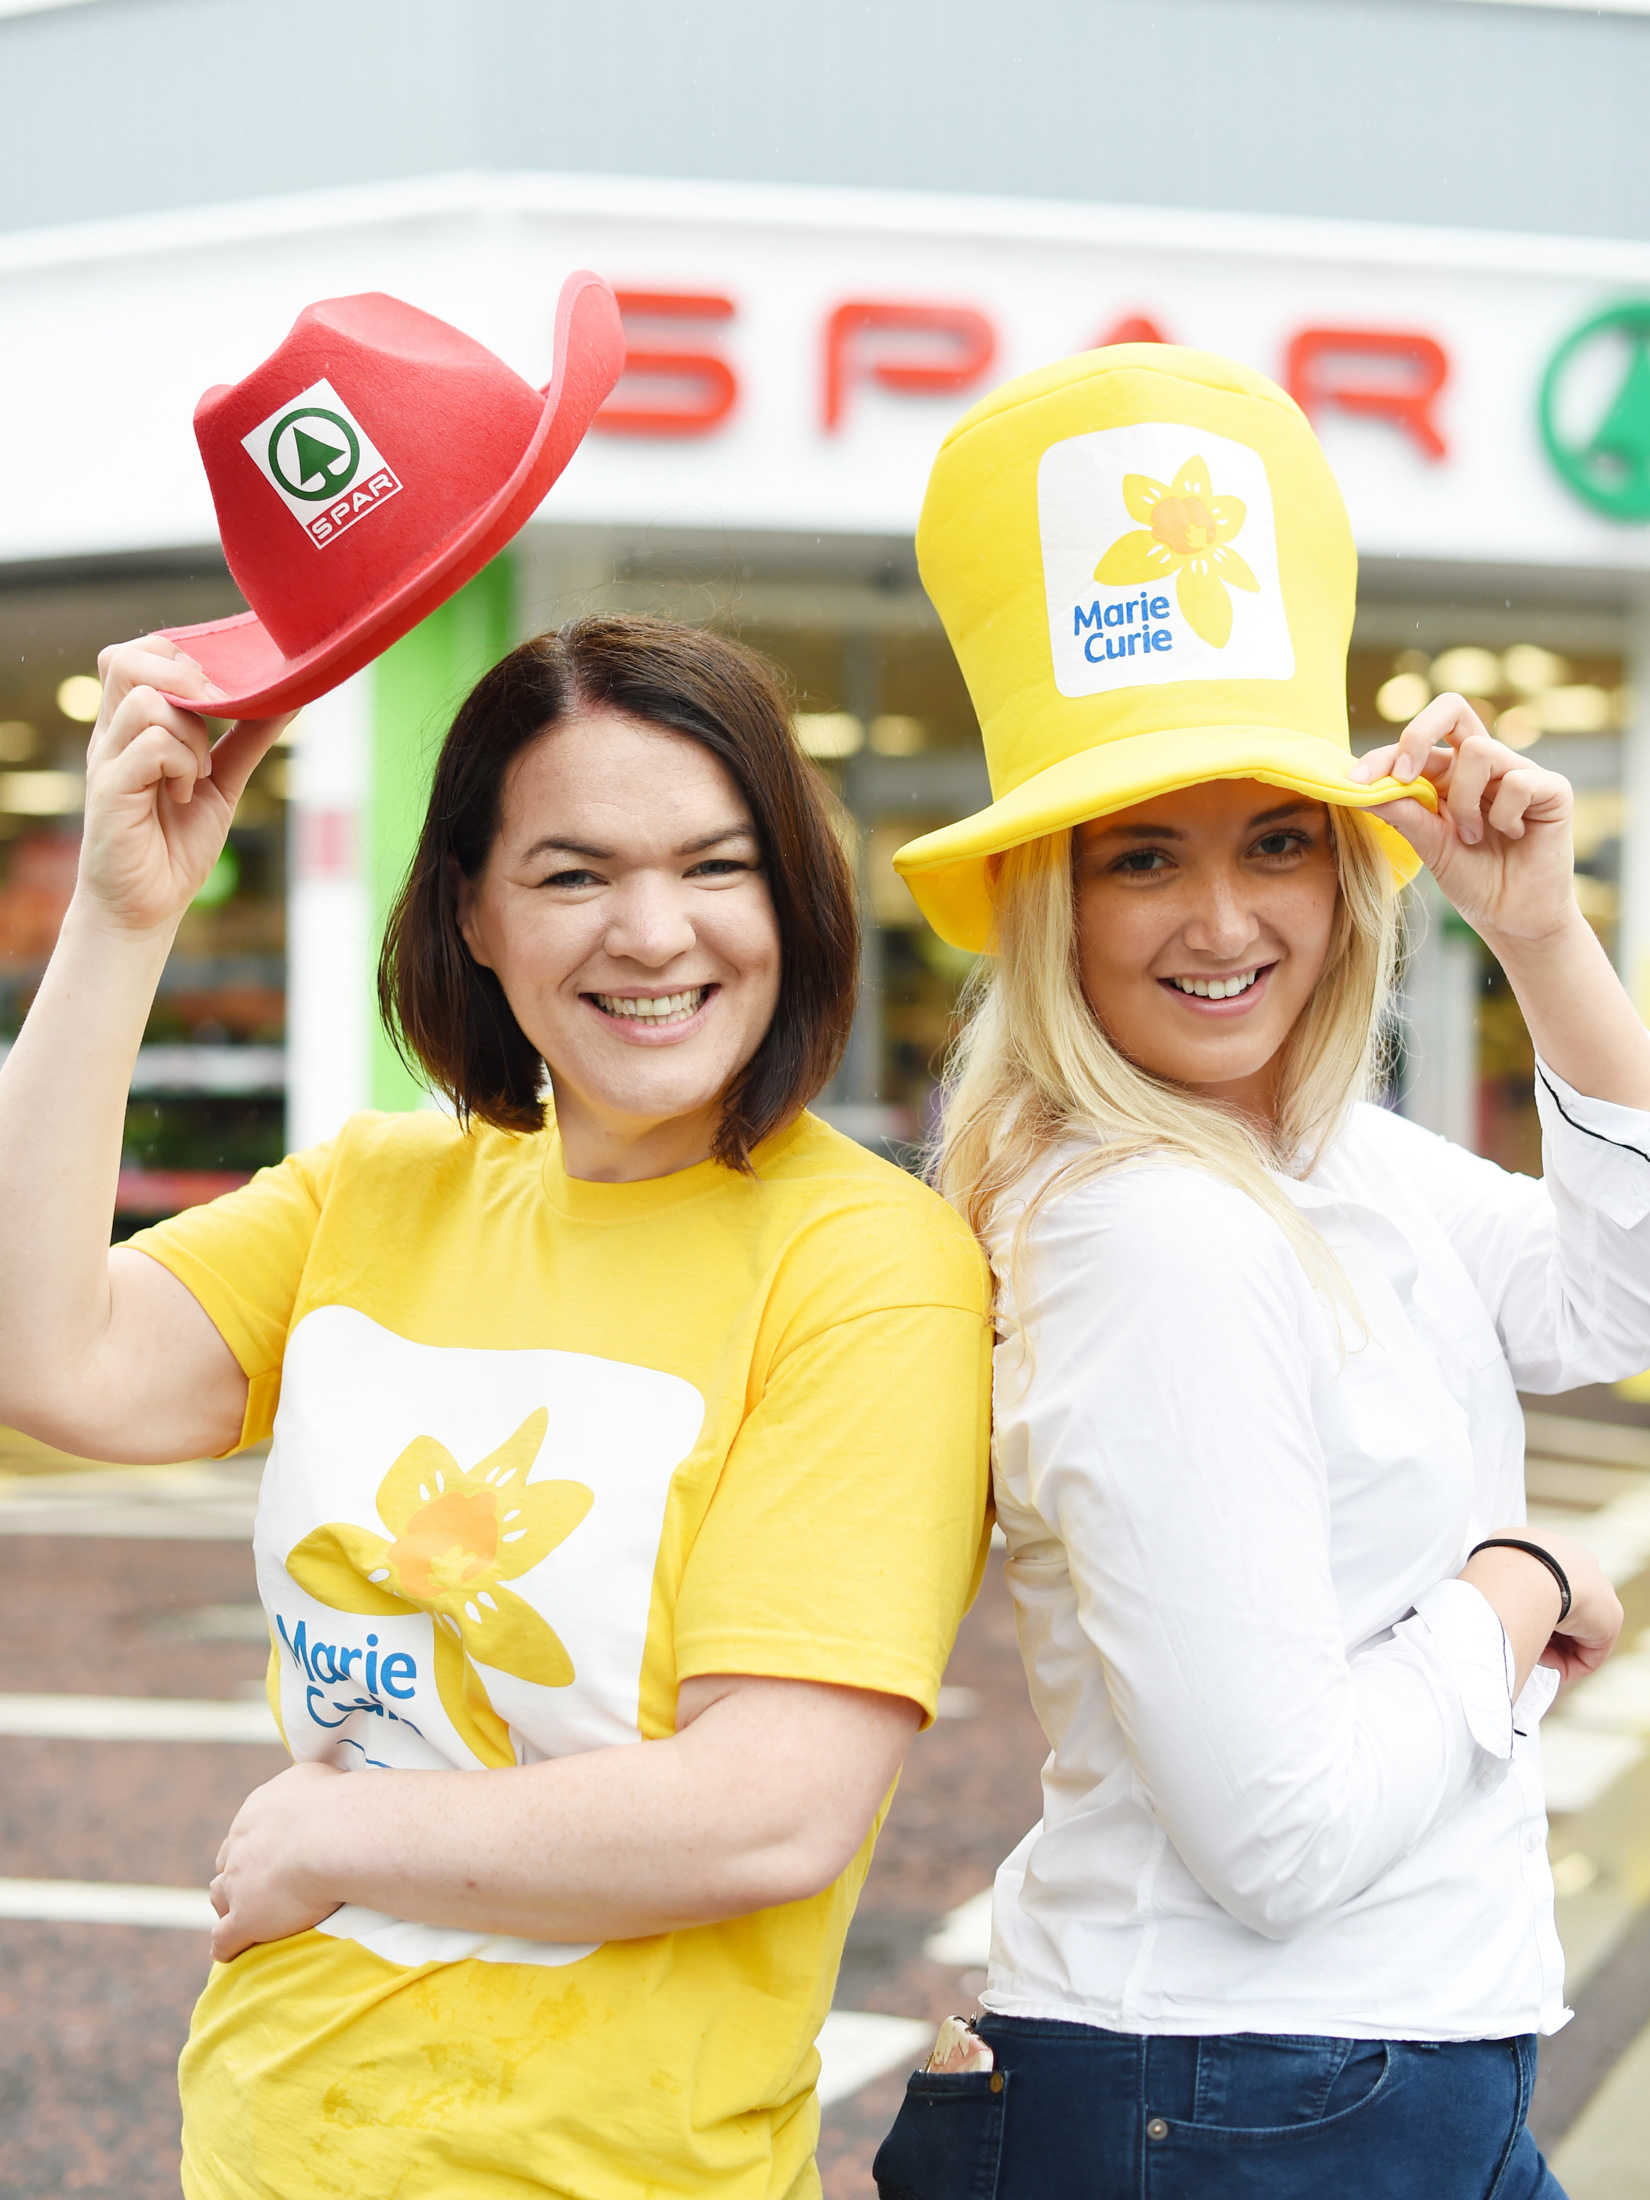 SPAR NI staff and shoppers raise over £200,000 for Marie Curie